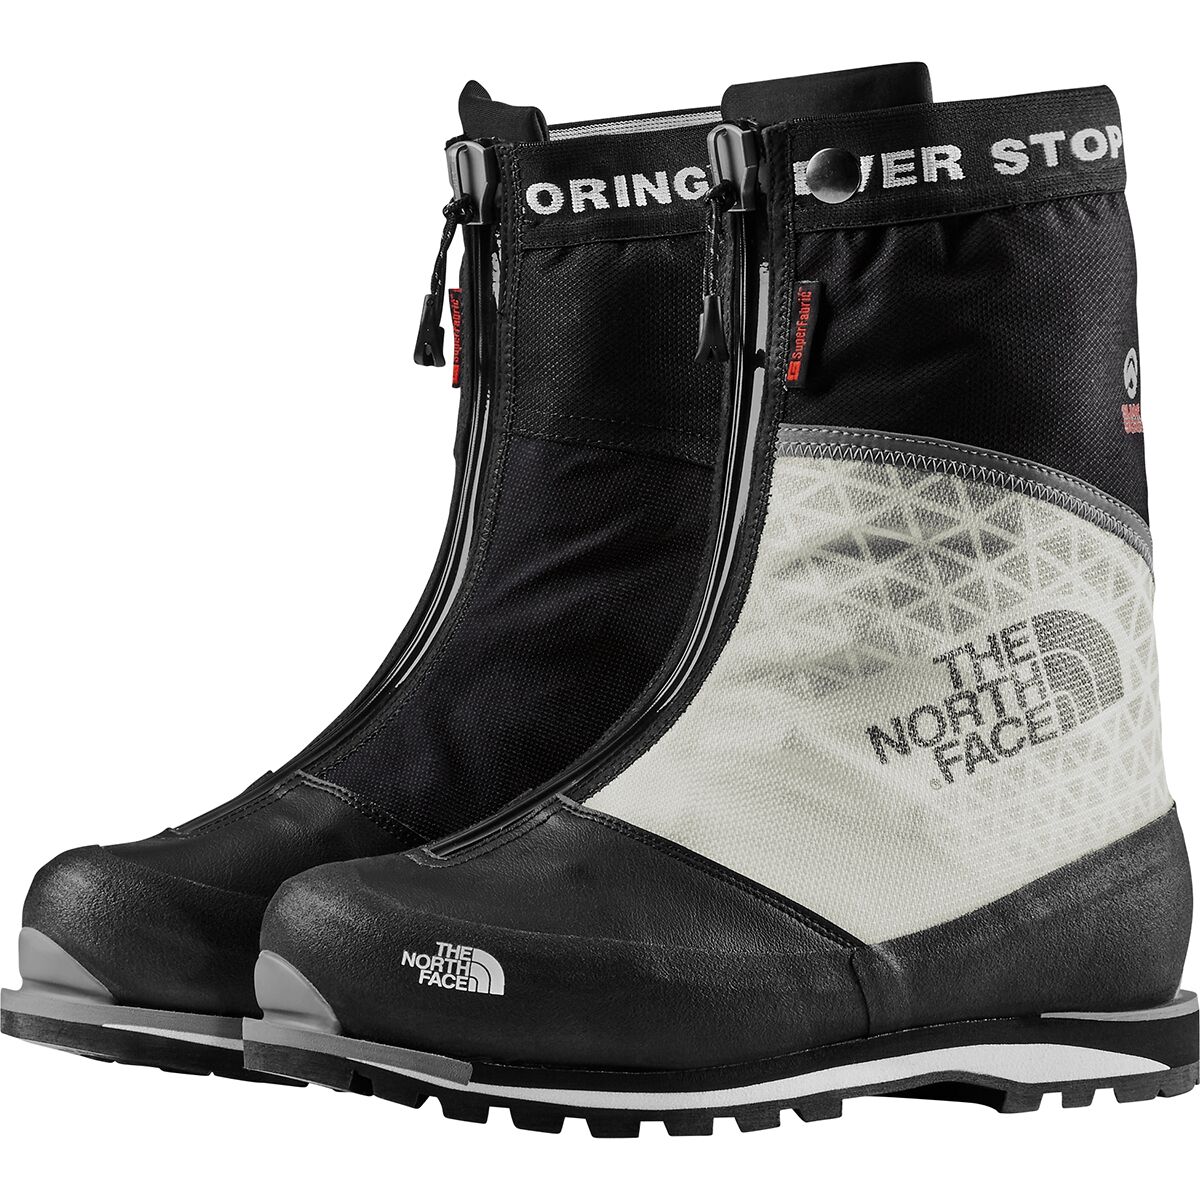 The North Face Verto S6K Extreme Boot 